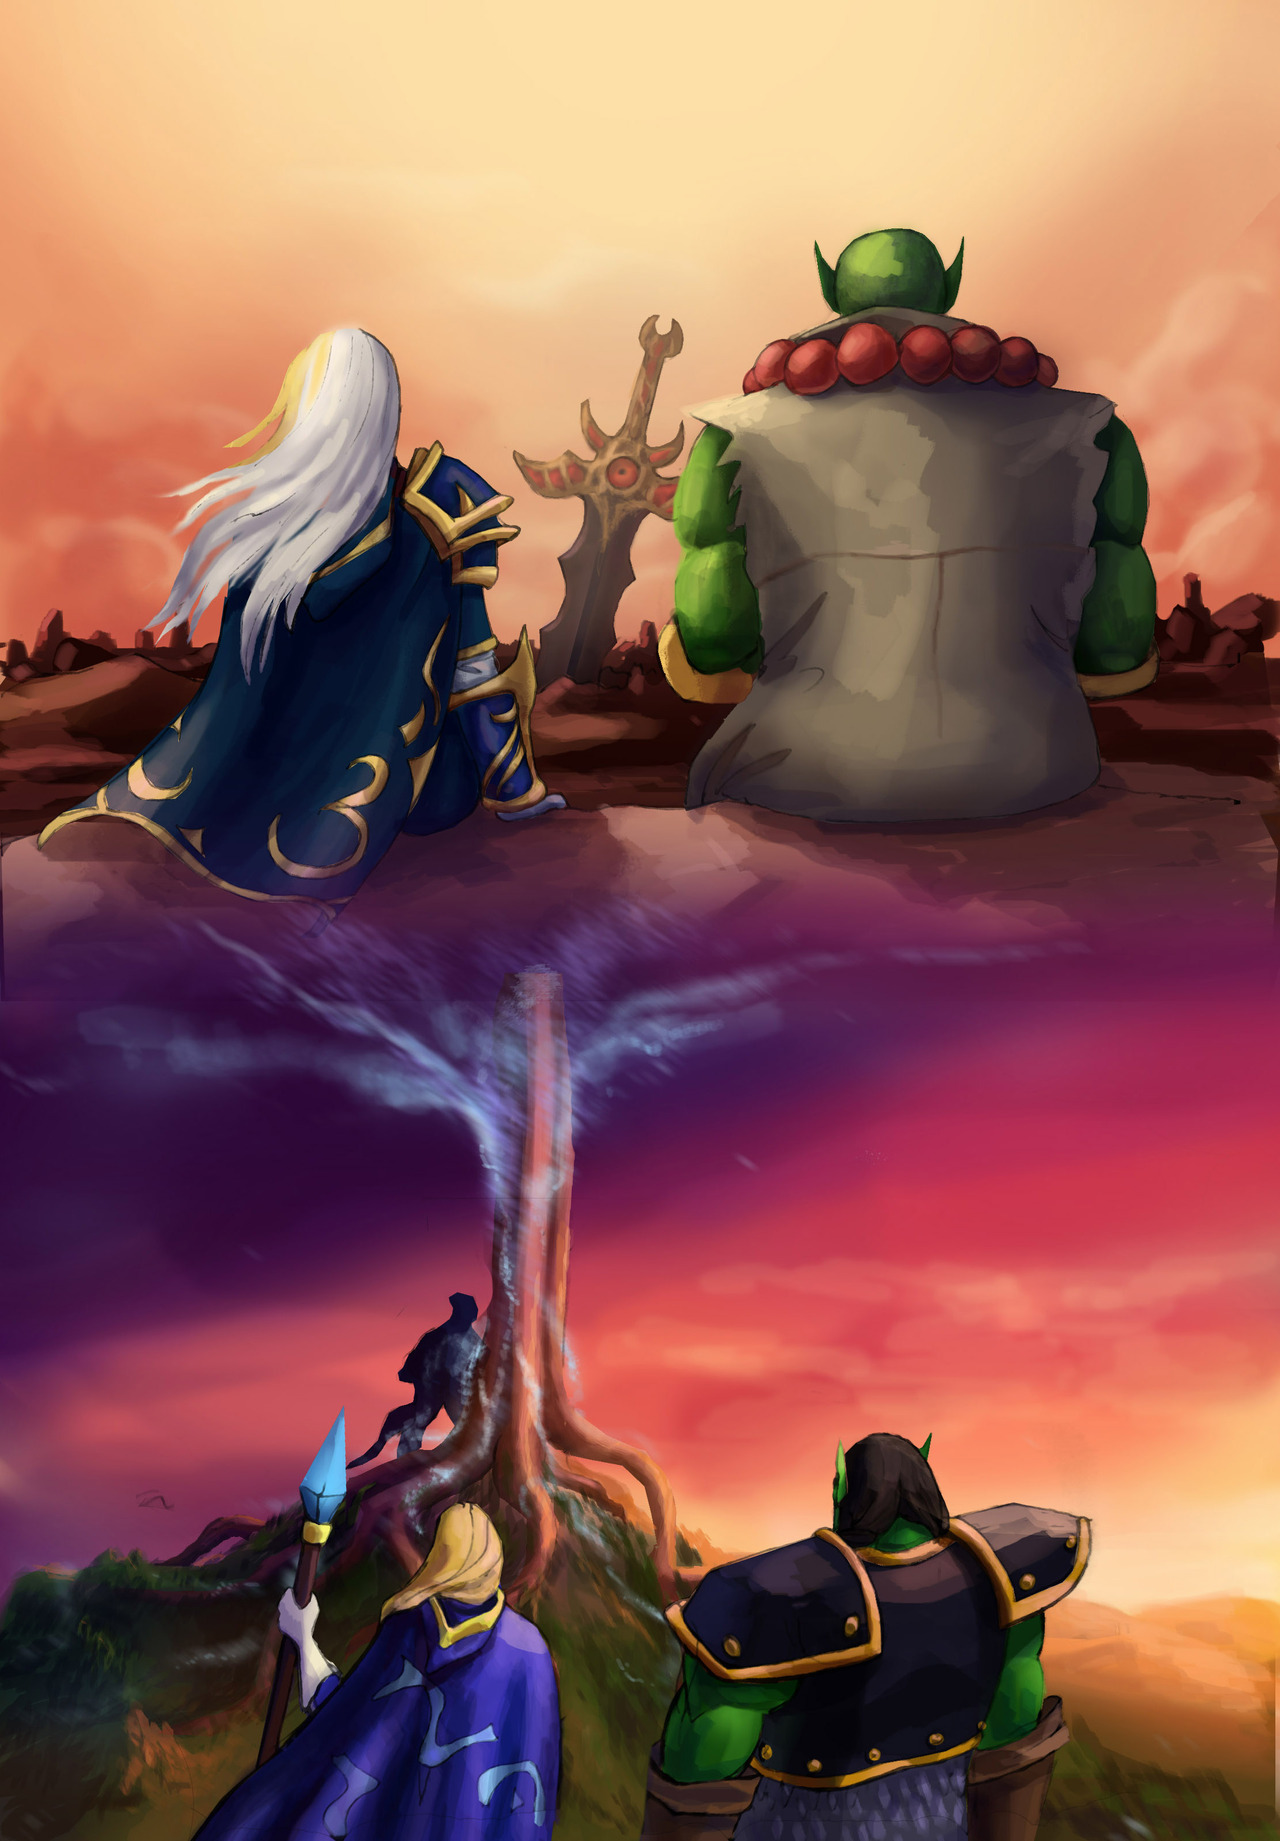 How much you've been through... - Wow, World of warcraft, Warcraft, Blizzard, Game art, Creation